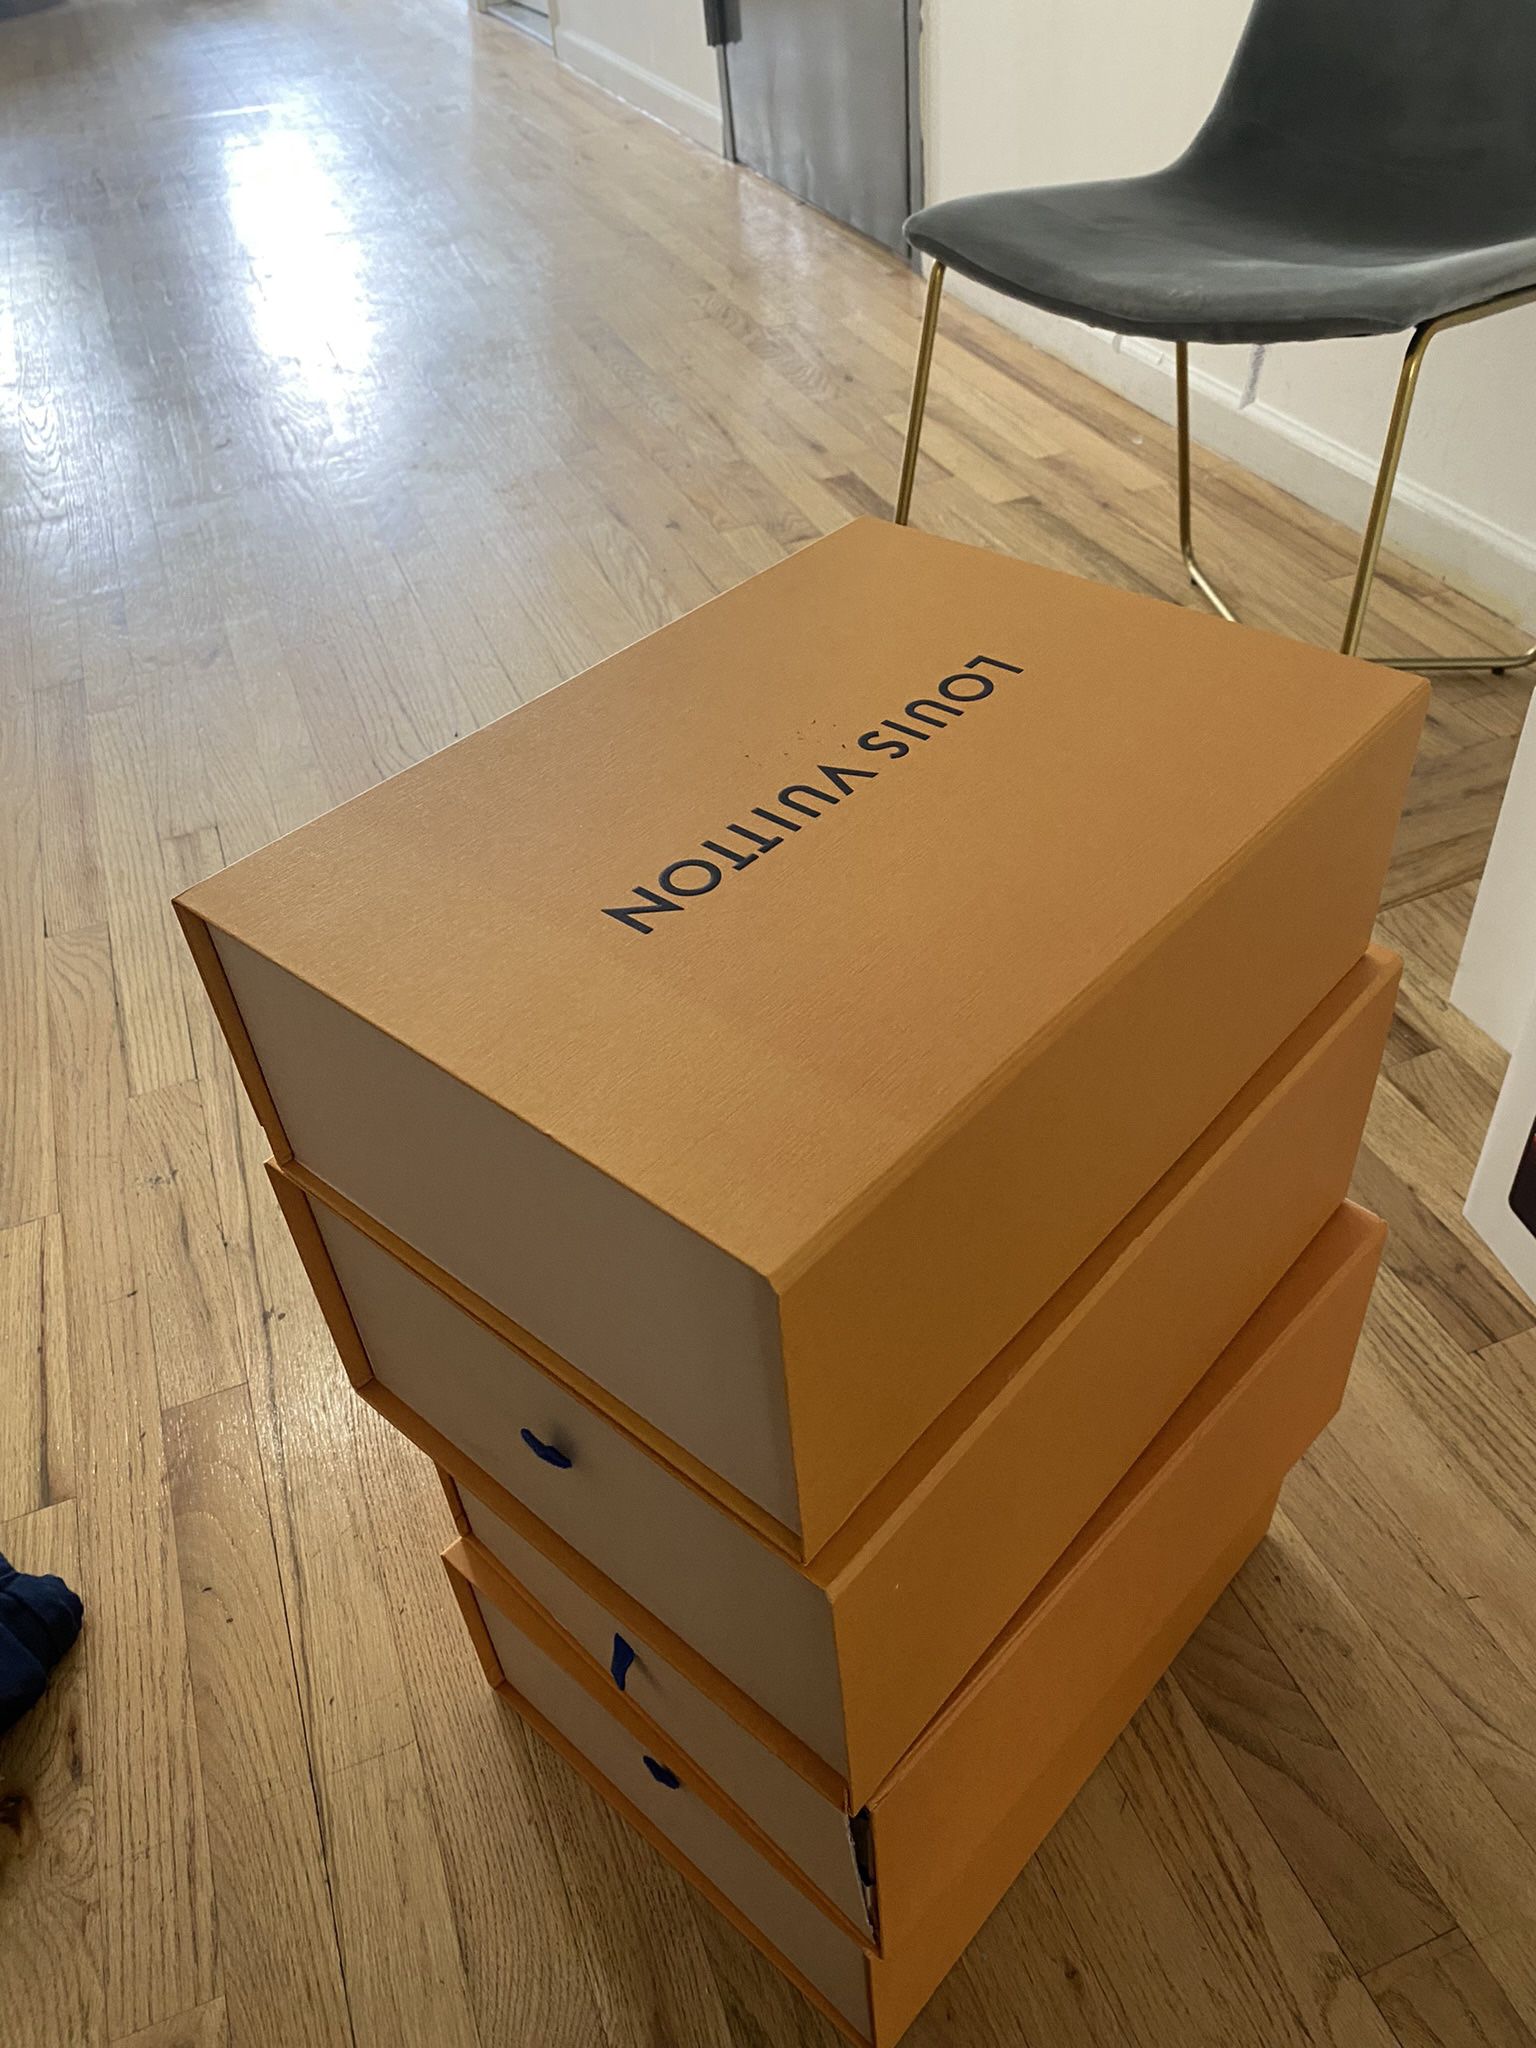 5 Empty Louis Vuitton Boxes for Sale in Brooklyn, NY - OfferUp